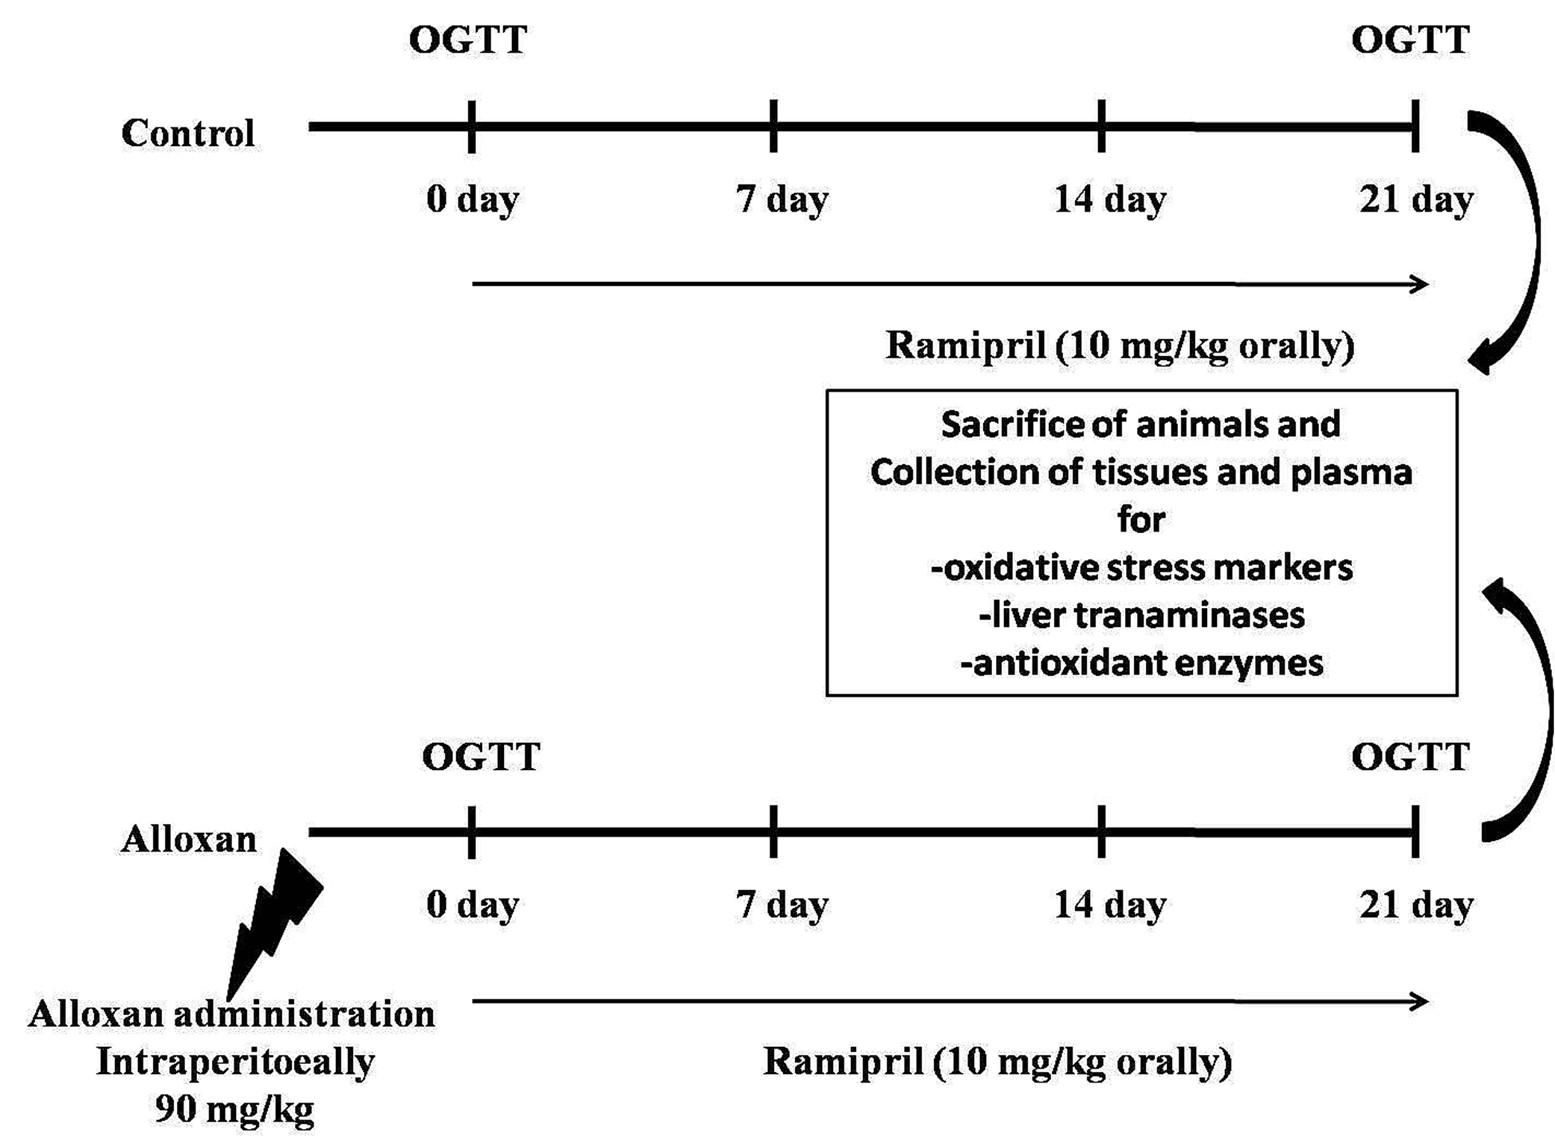 Ramipril, an angiotensin-converting enzyme inhibitor ameliorates oxidative stress, inflammation, and hepatic fibrosis in alloxan-induced diabetic rats